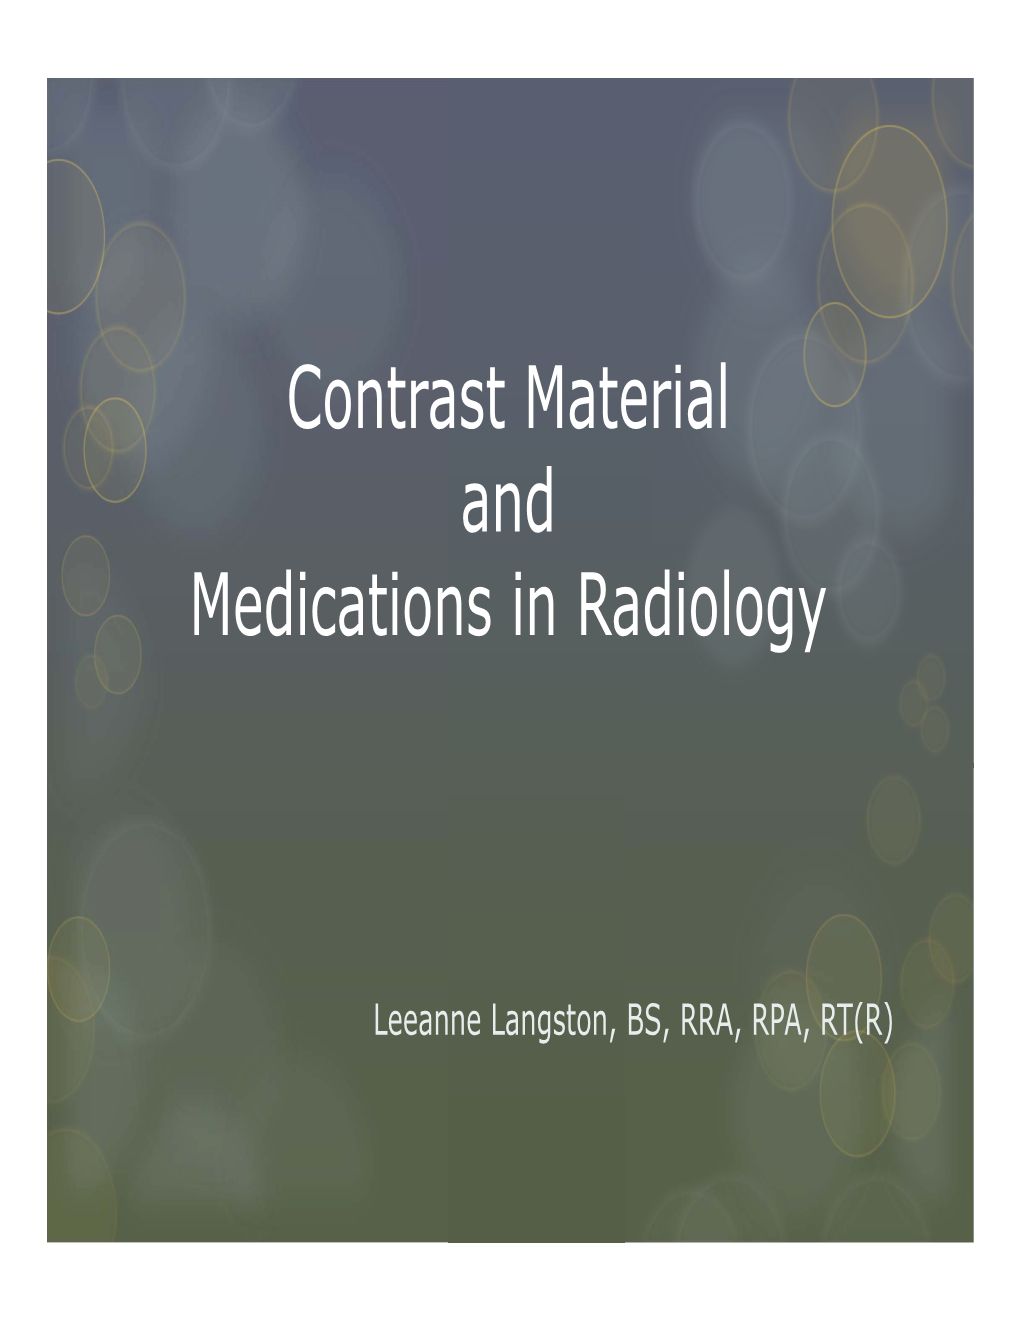 Contrast Material and Medications in Radiology